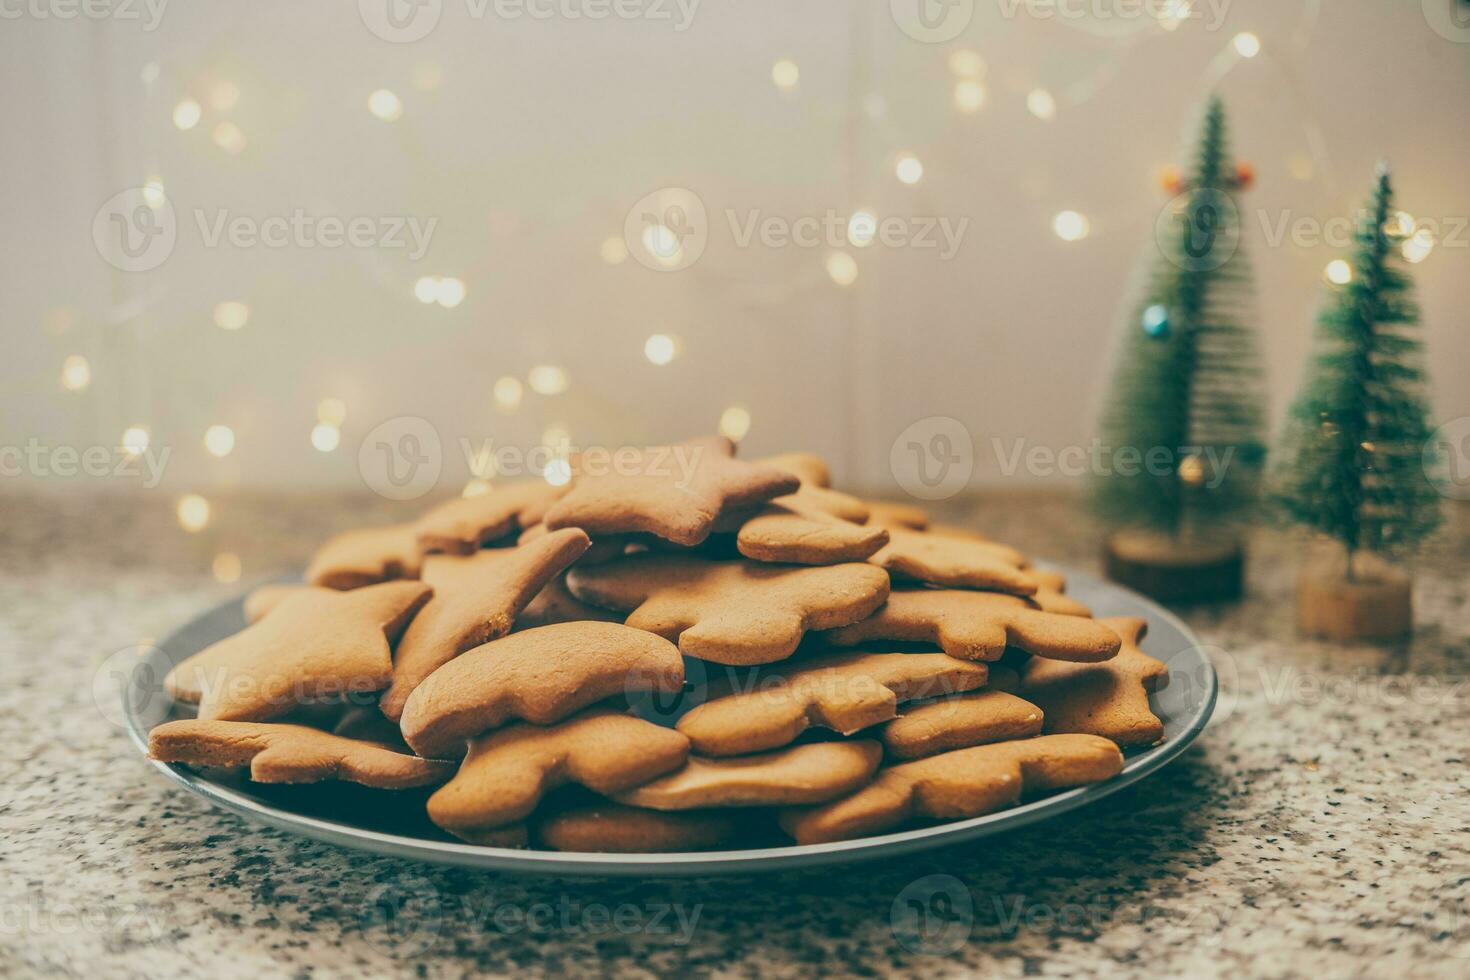 These ginger cookies, with their irresistible aroma and festive presentation photo